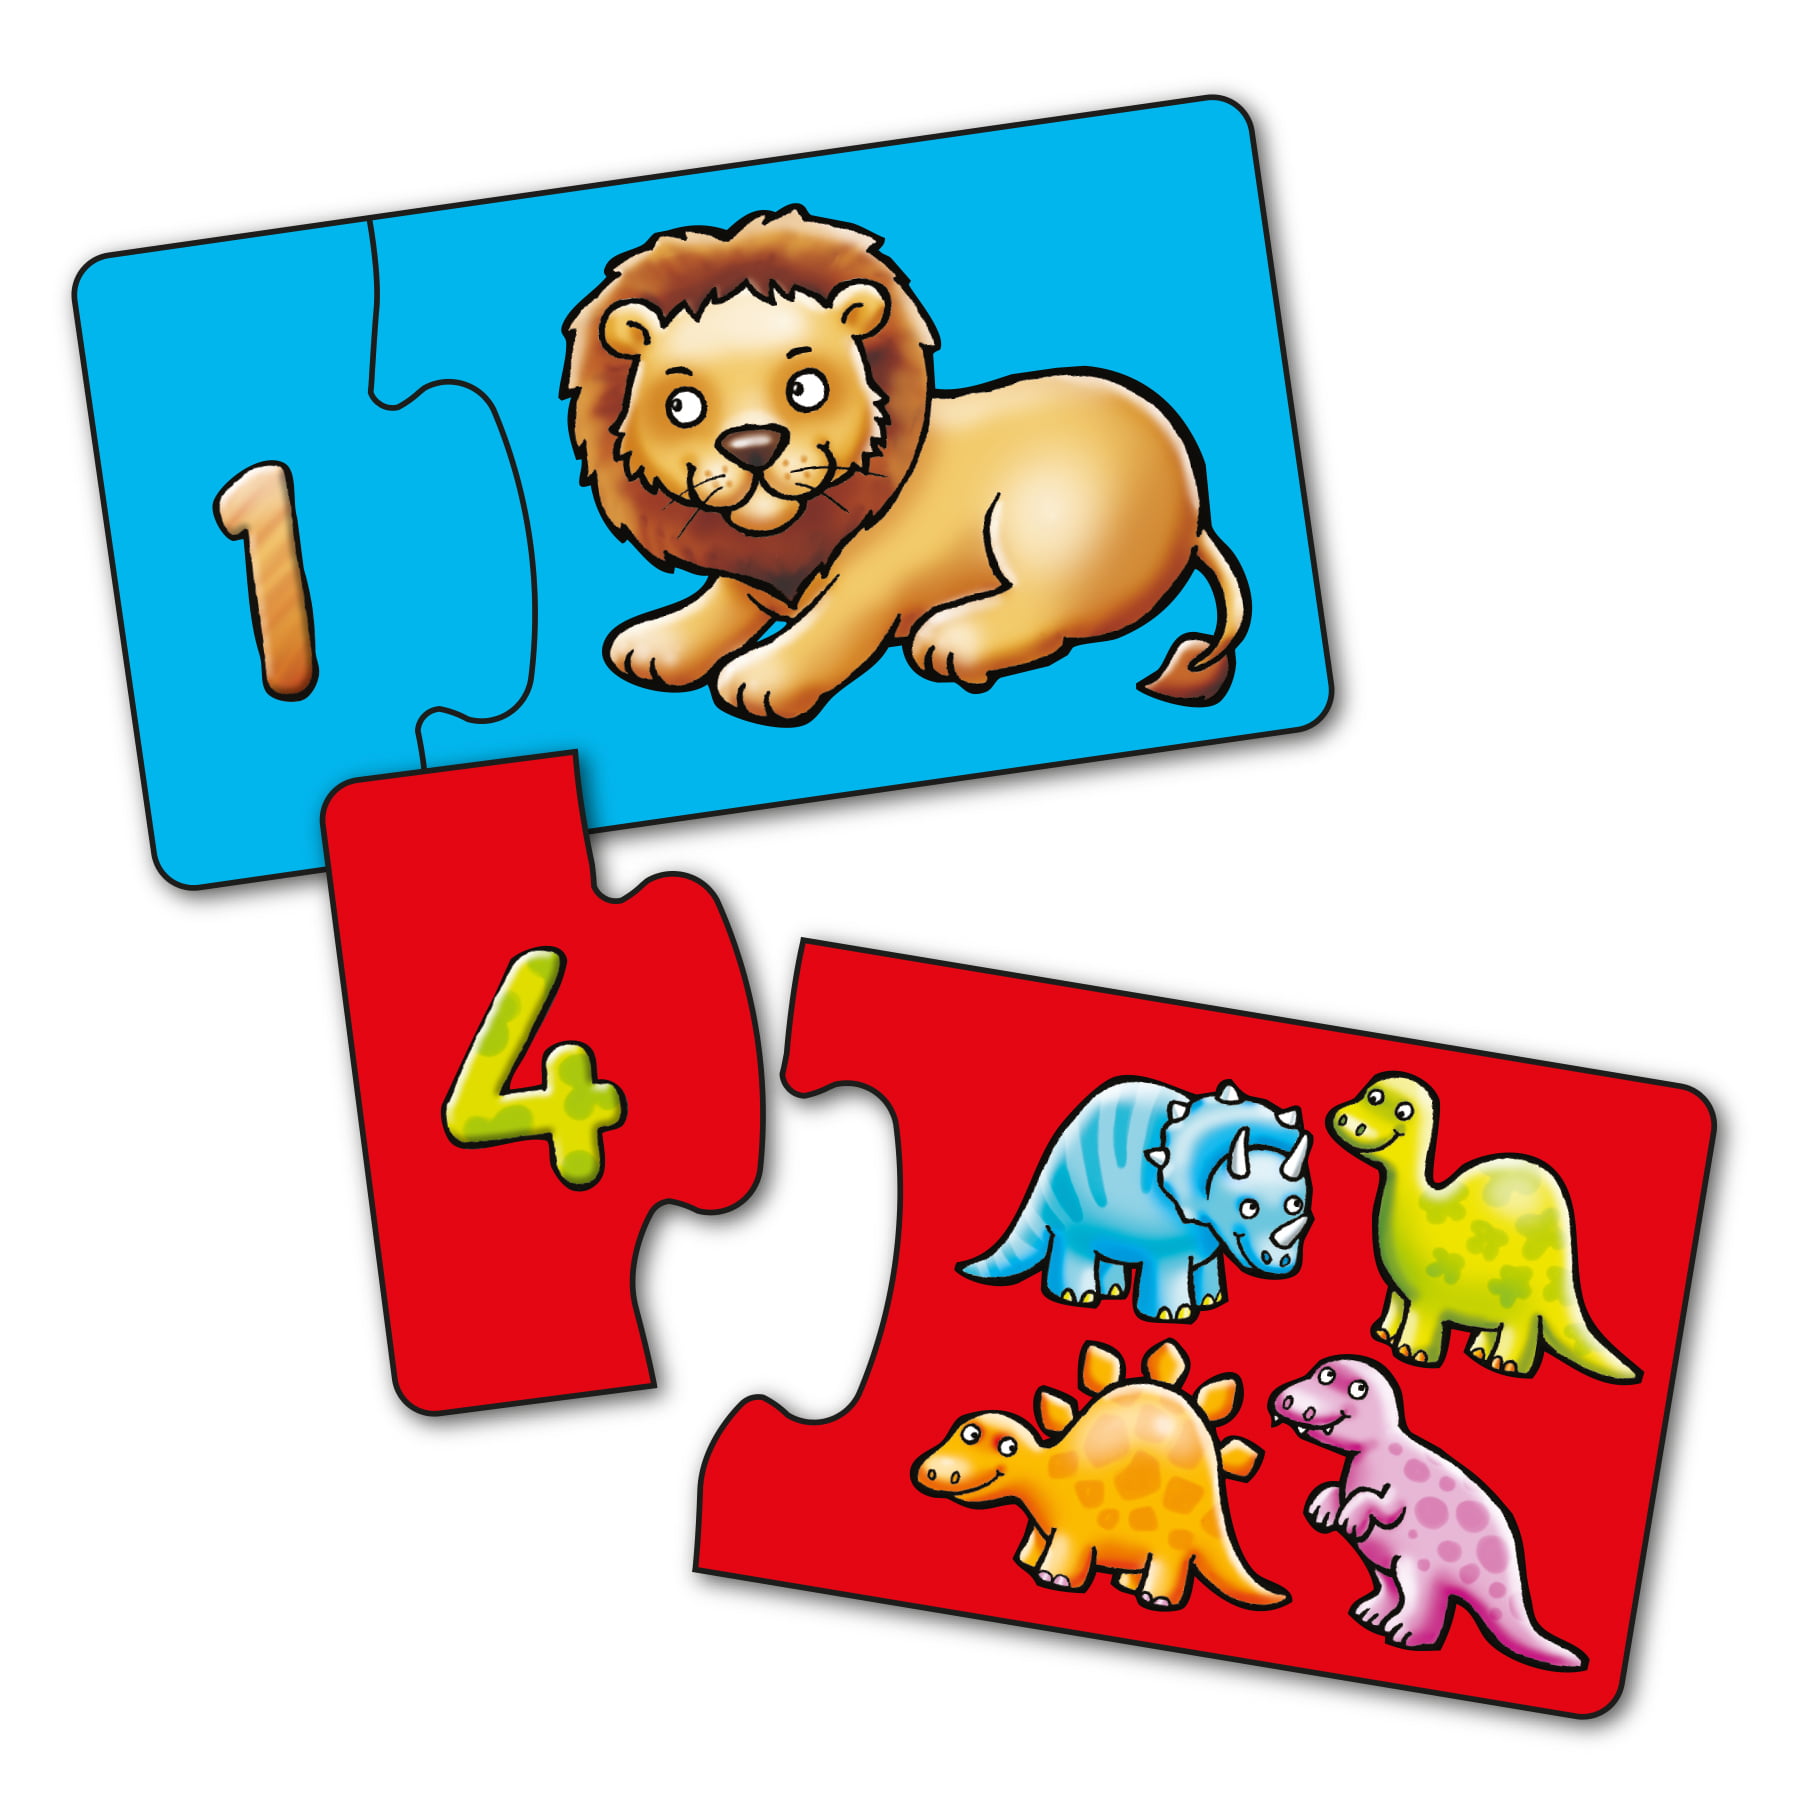 Details about   Orchard Toys Match and Count Jigsaw Game 